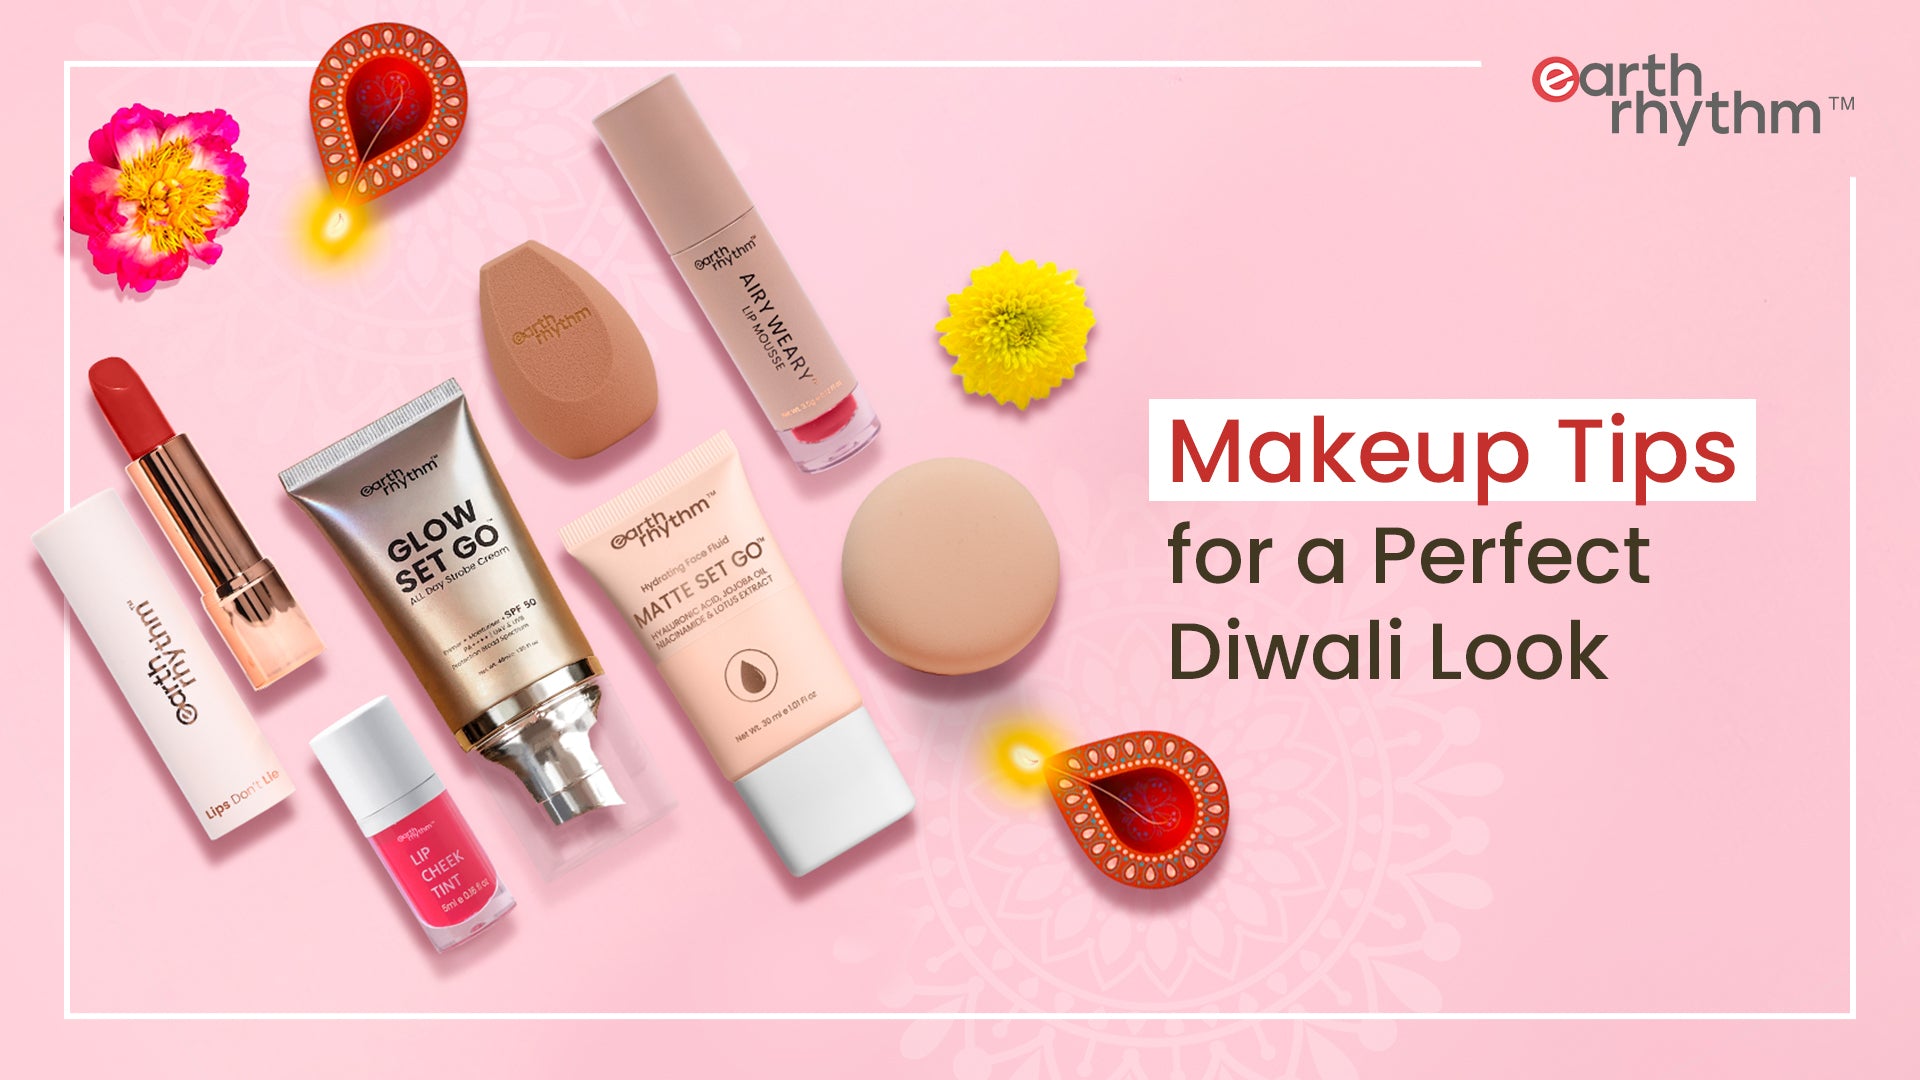 Makeup Tips For a Perfect Diwali Look